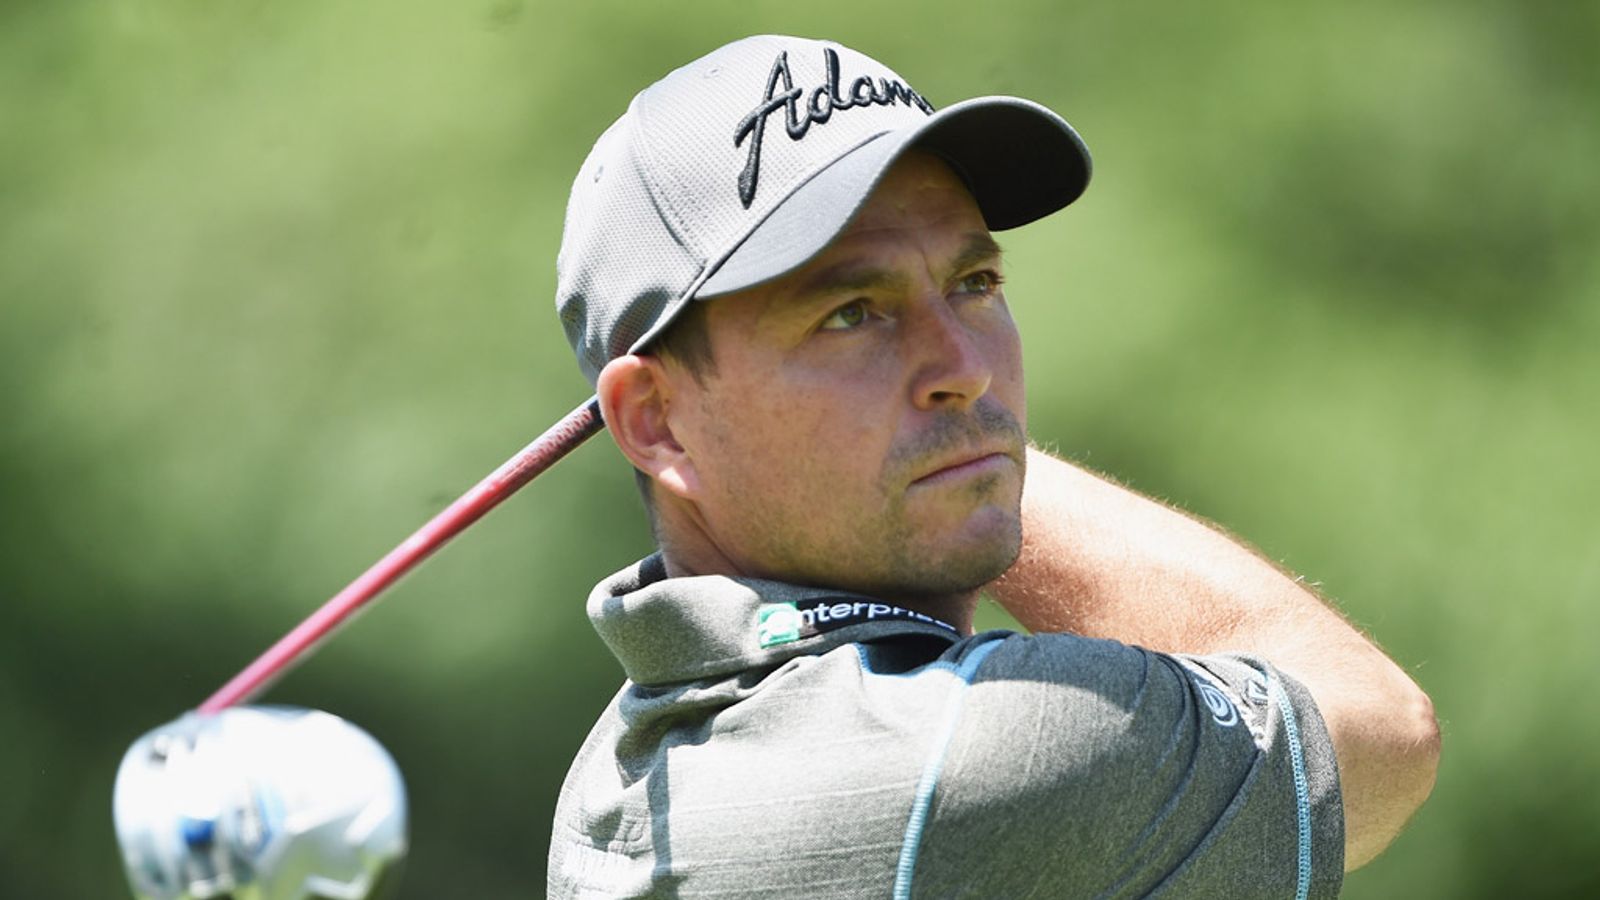 David Howell shares early lead at Volvo China Open | Golf News | Sky Sports